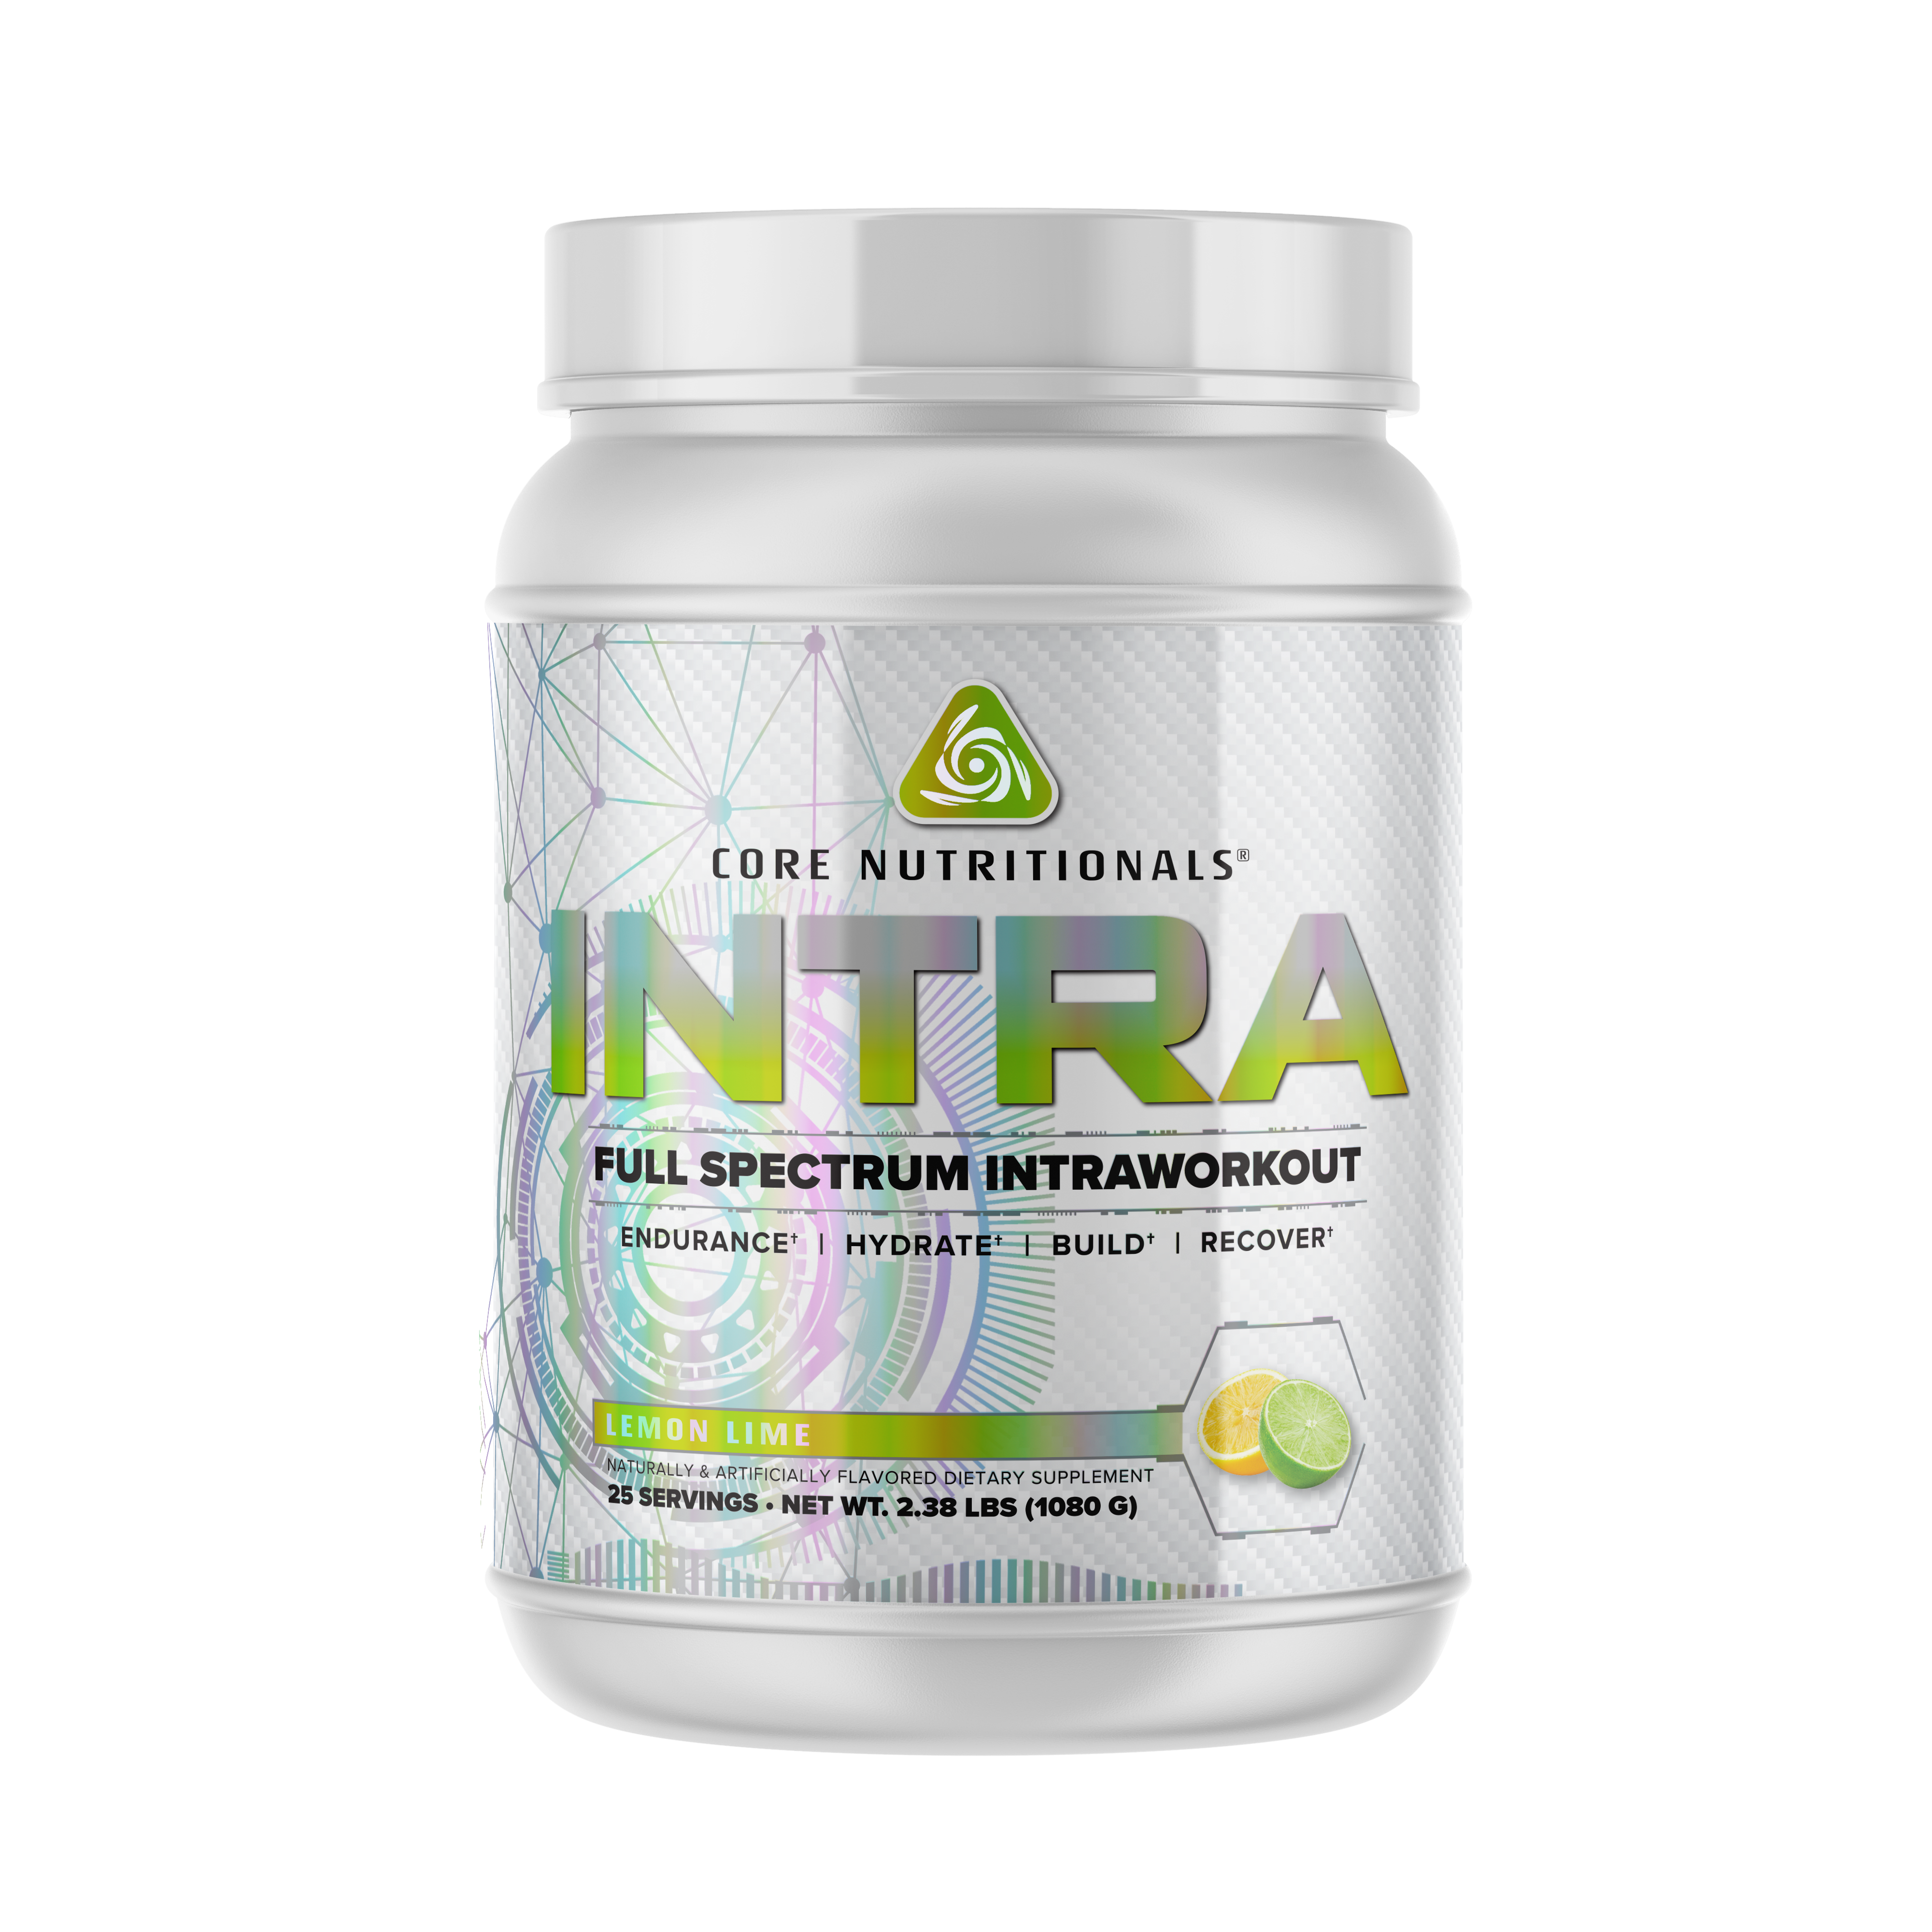 Core Nutritionals INTRA – Intra-Workout – Professional Supplements & Protein From A-list Nutrition